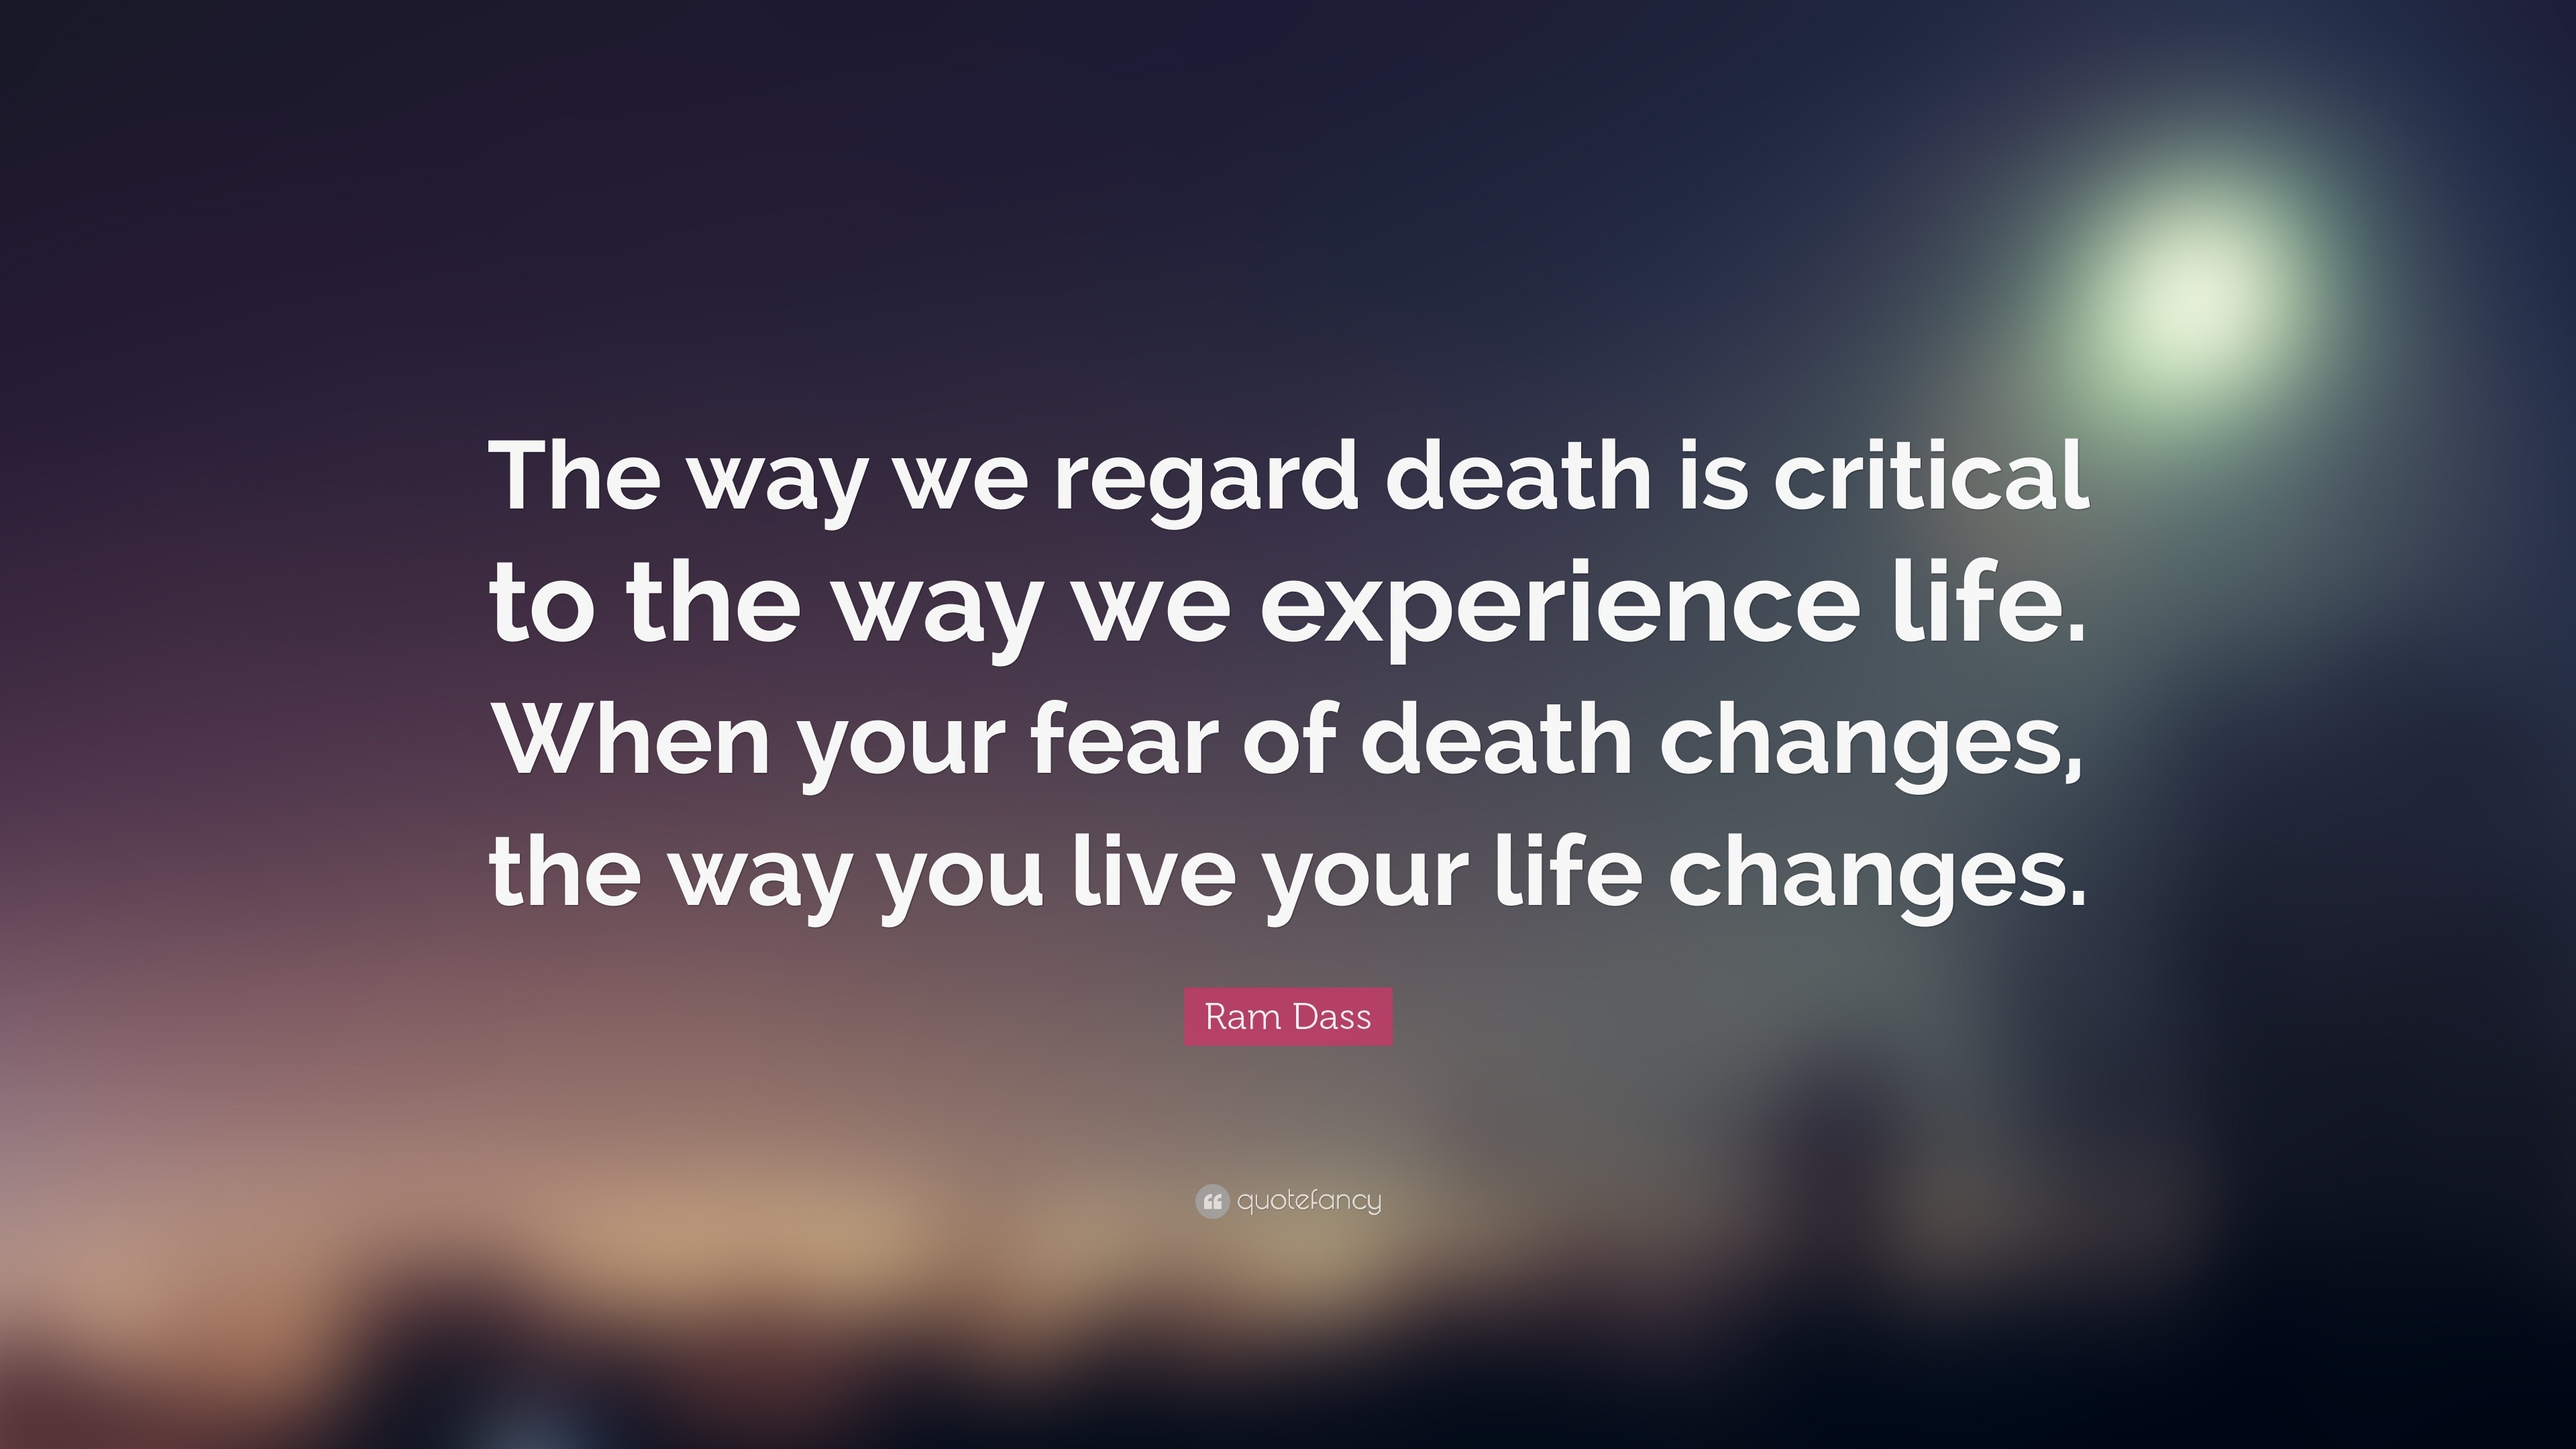 Ram Dass Quote: “The way we regard death is critical to the way we ...